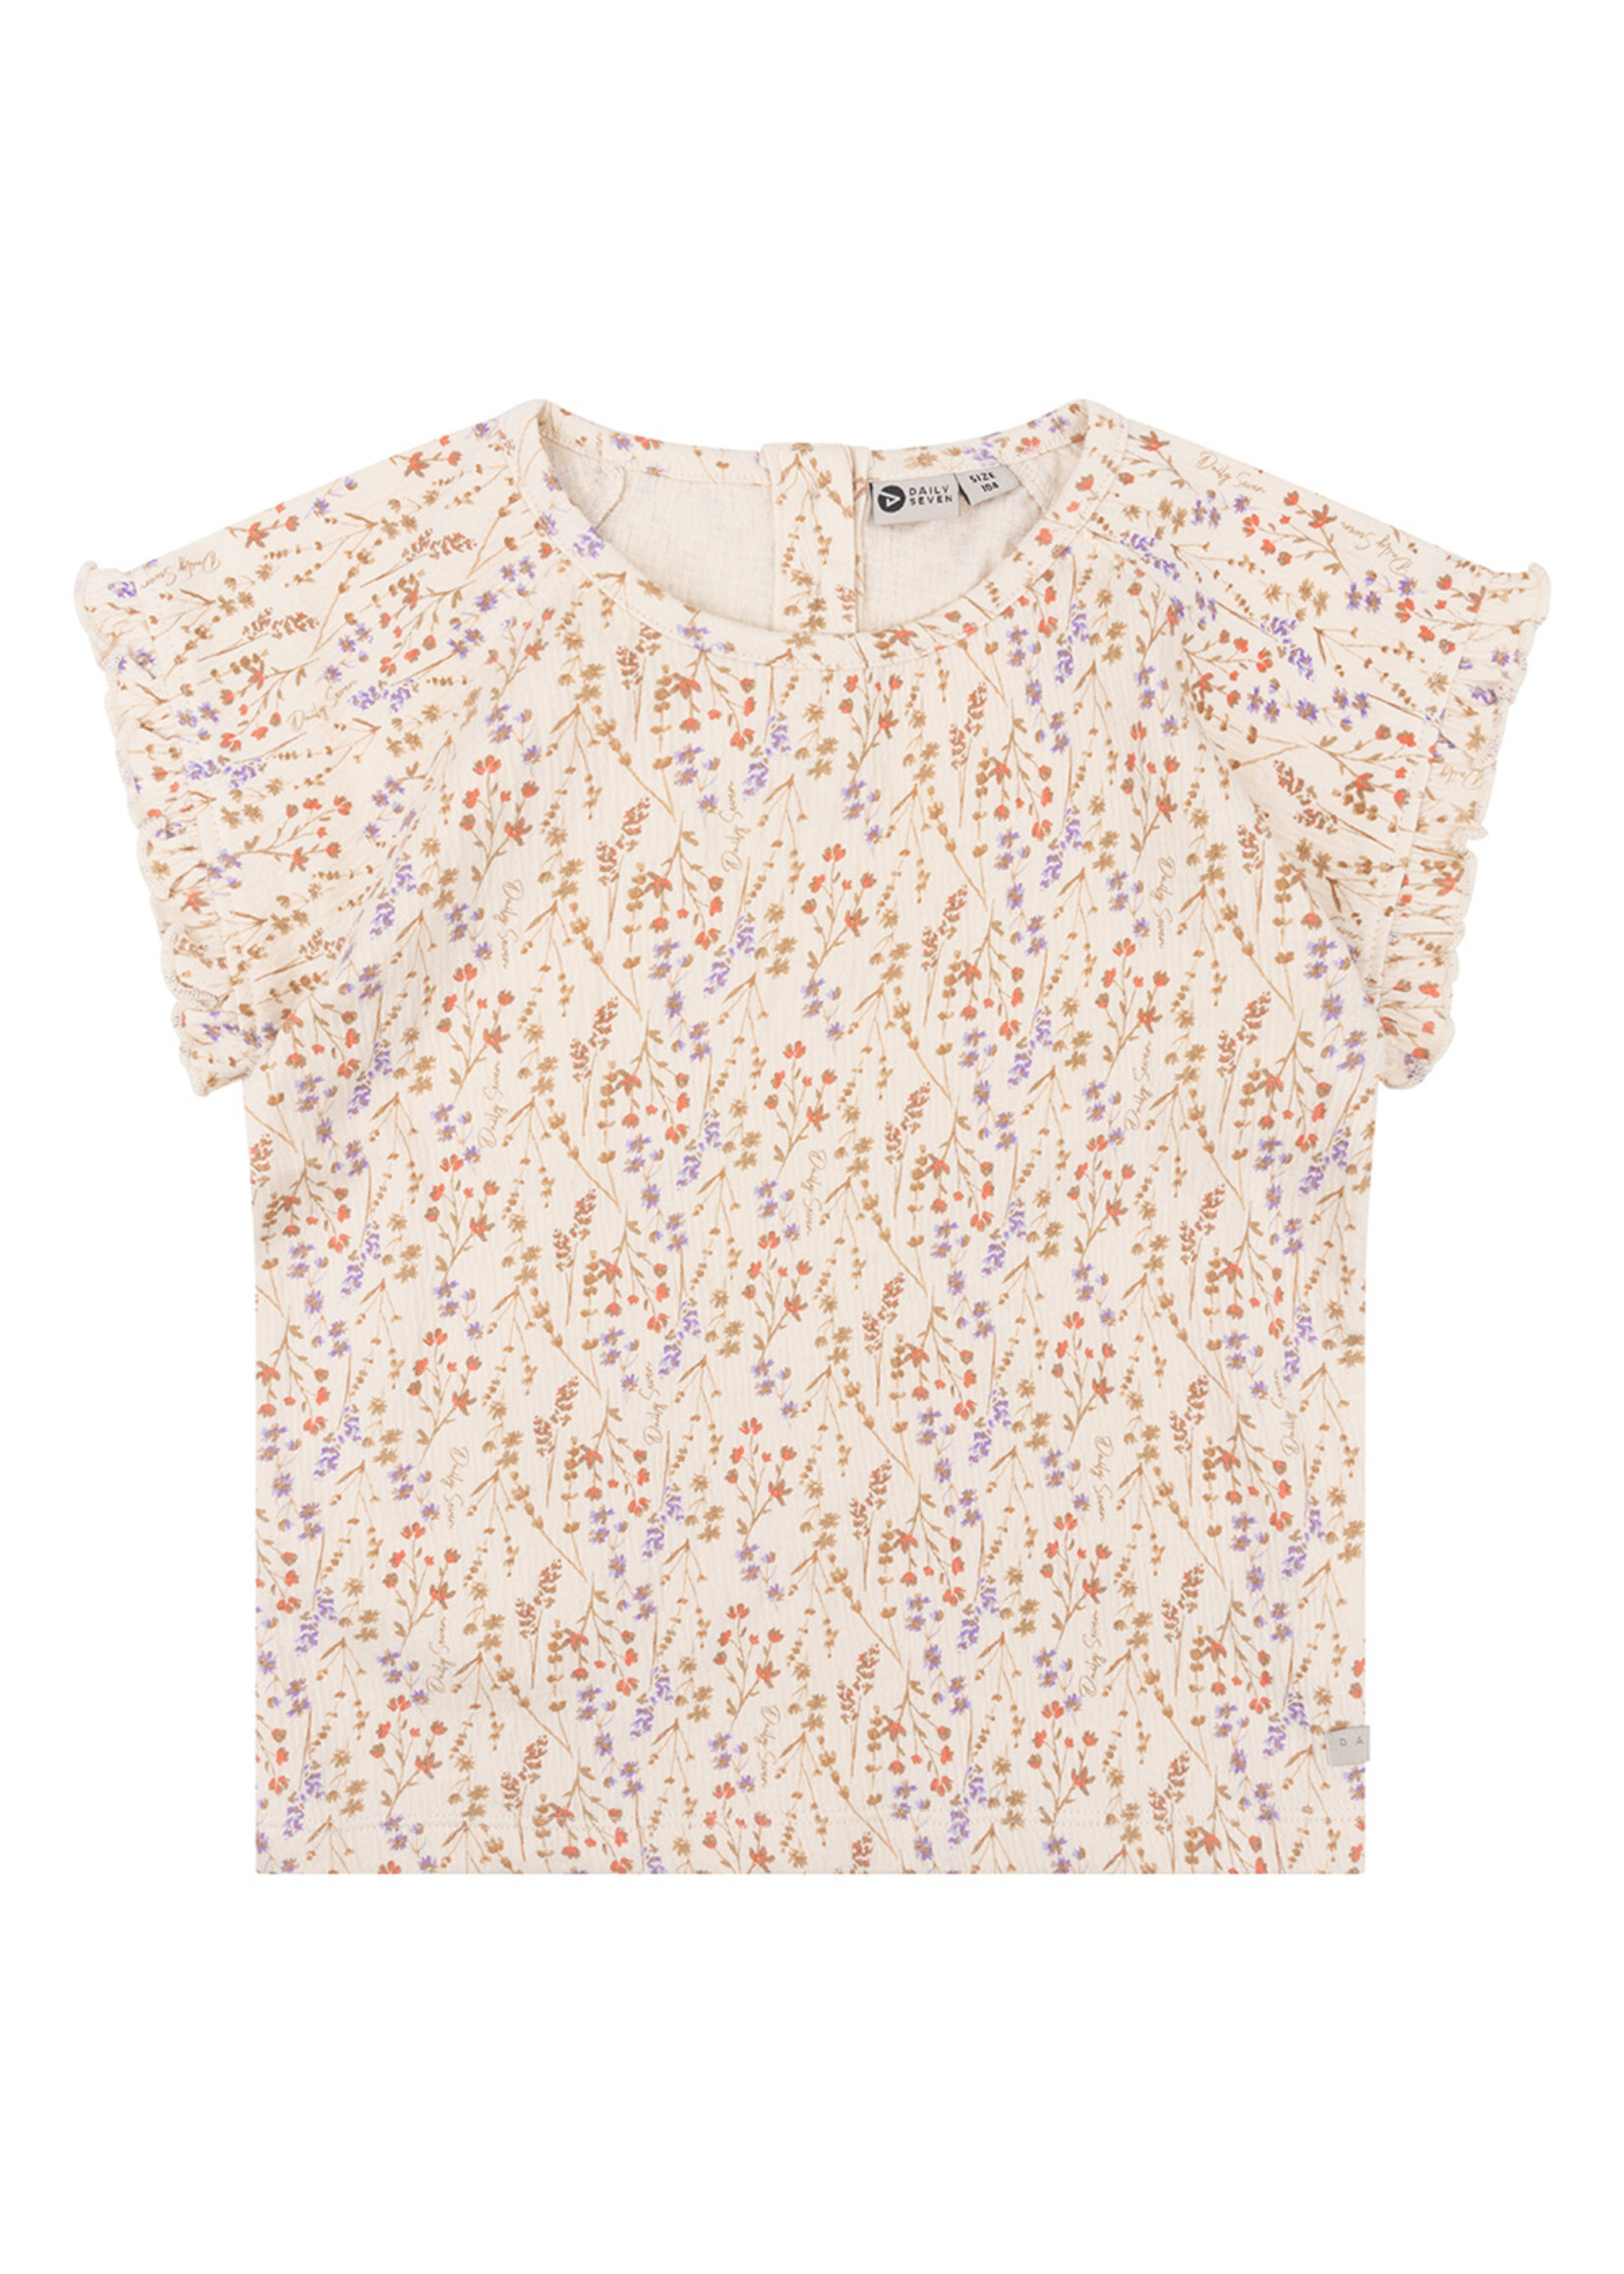 Daily7 Organic T-shirt Structure Mille Fleur Sandshell